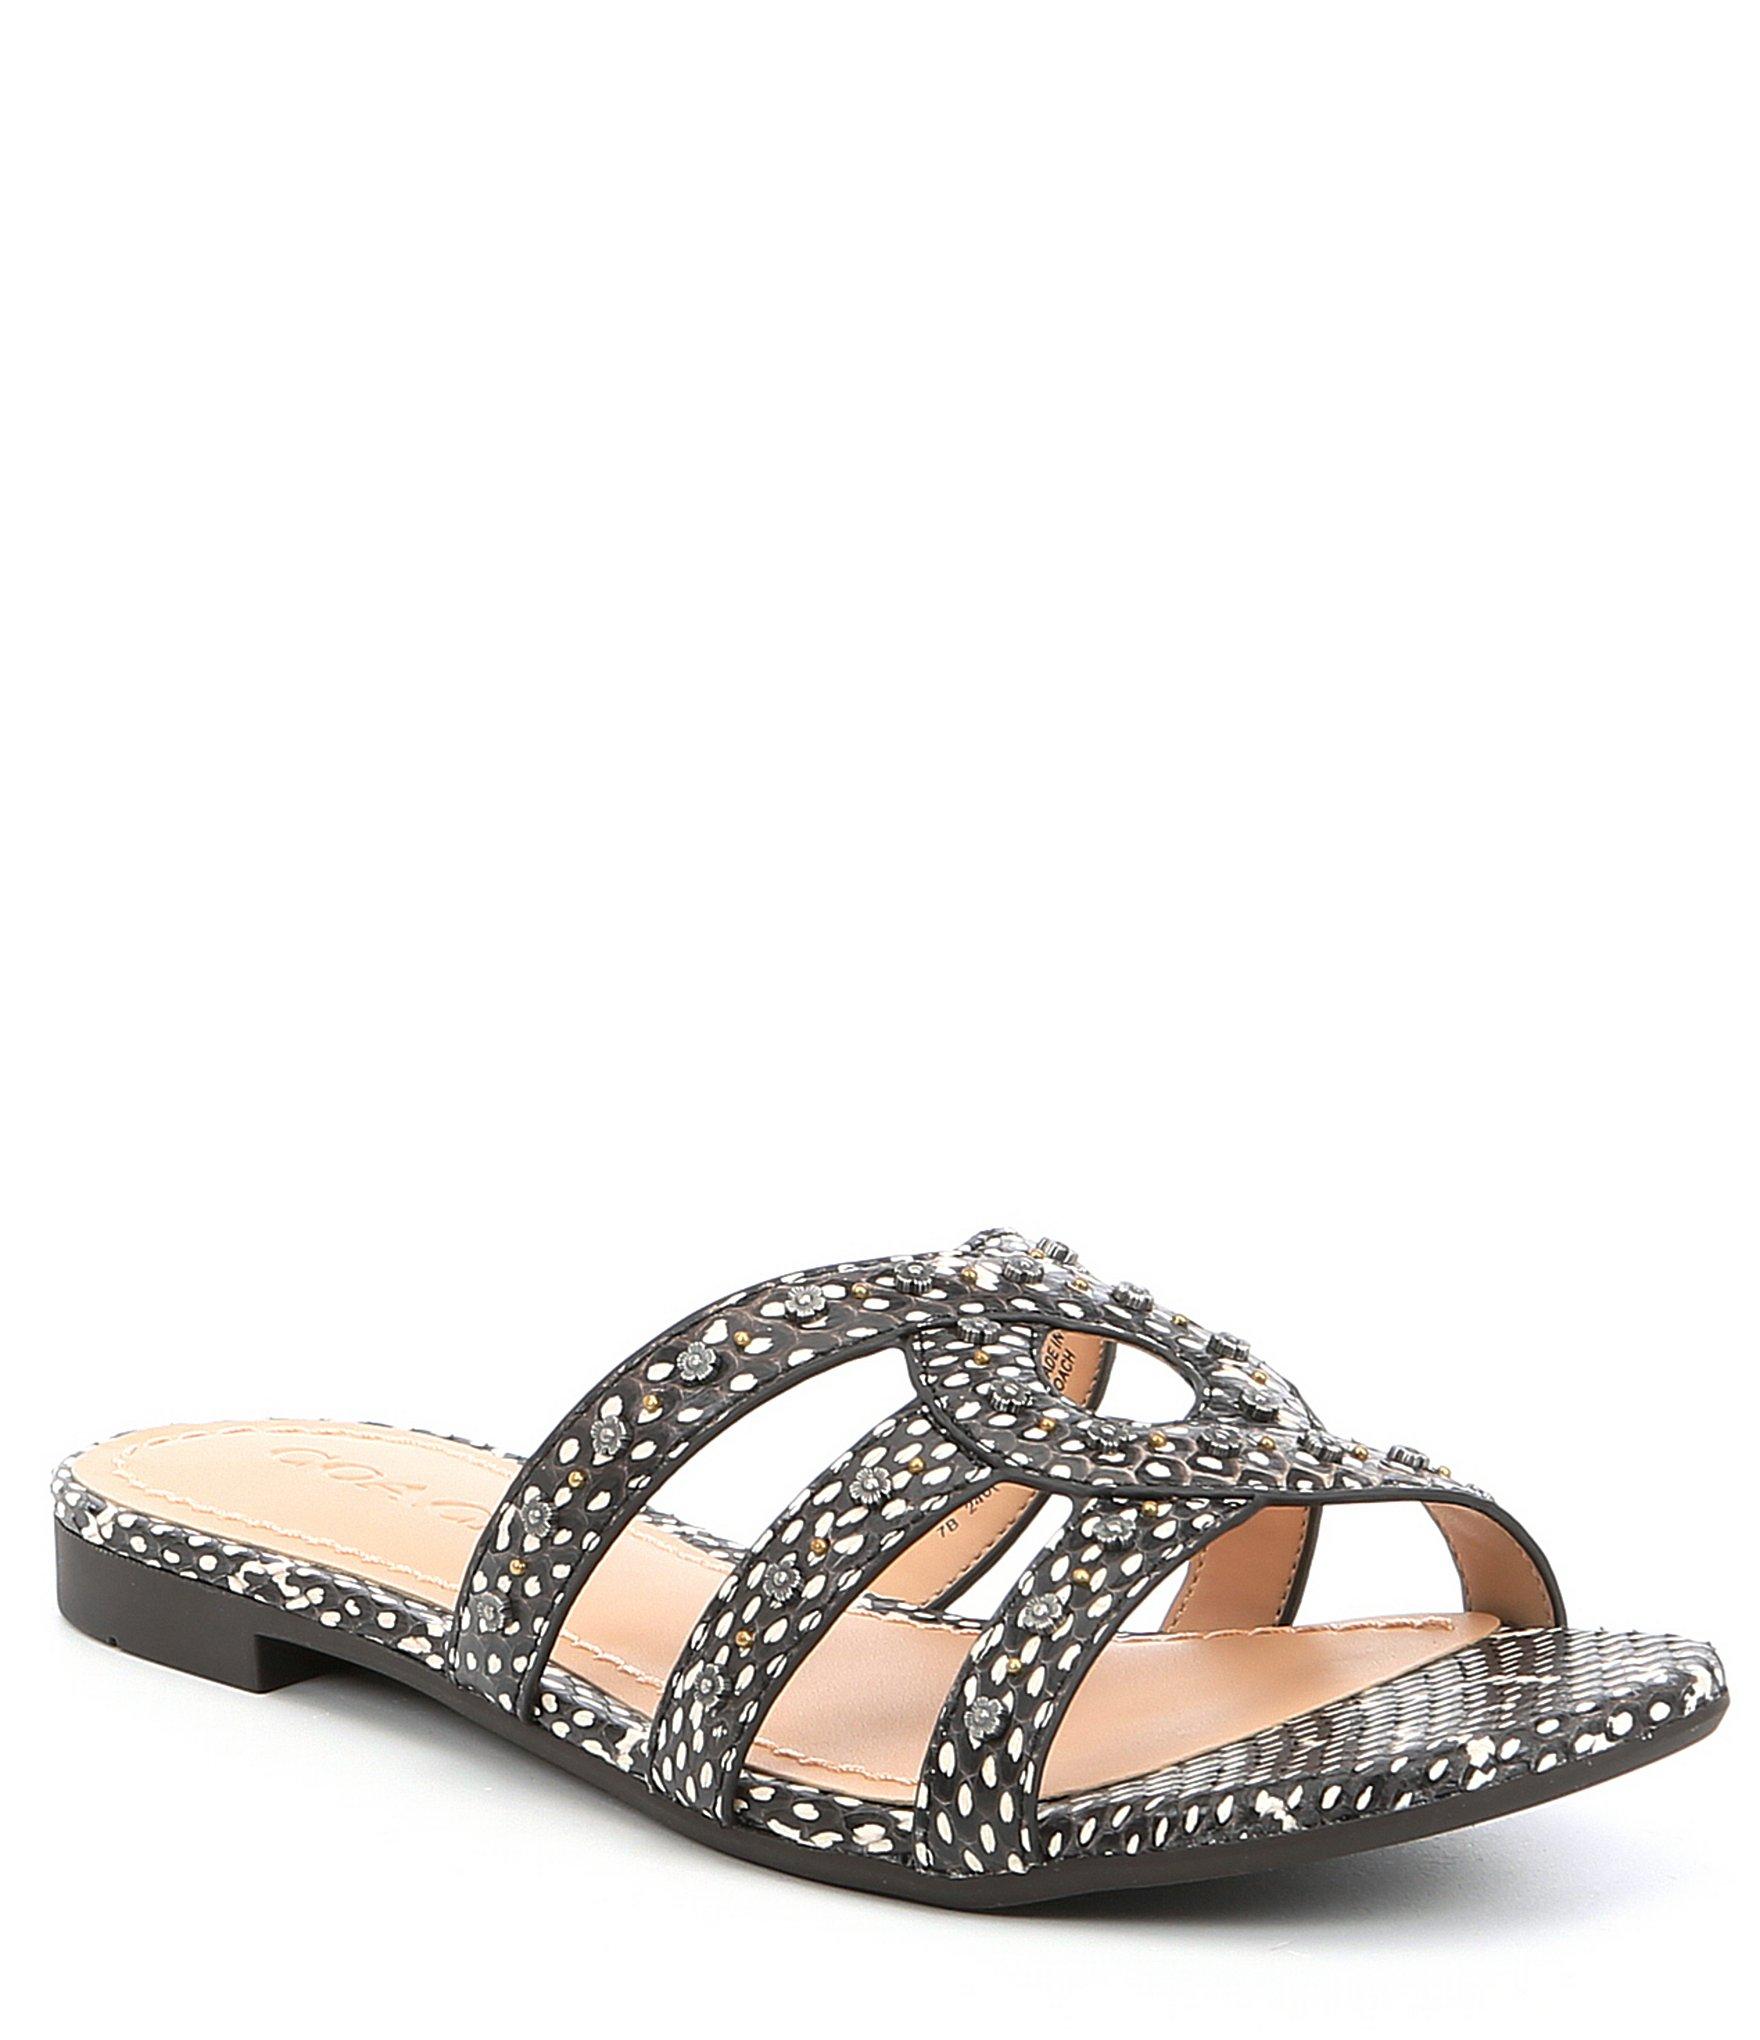 COACH Kennedy Leather Flat Sandals in Natural - Lyst